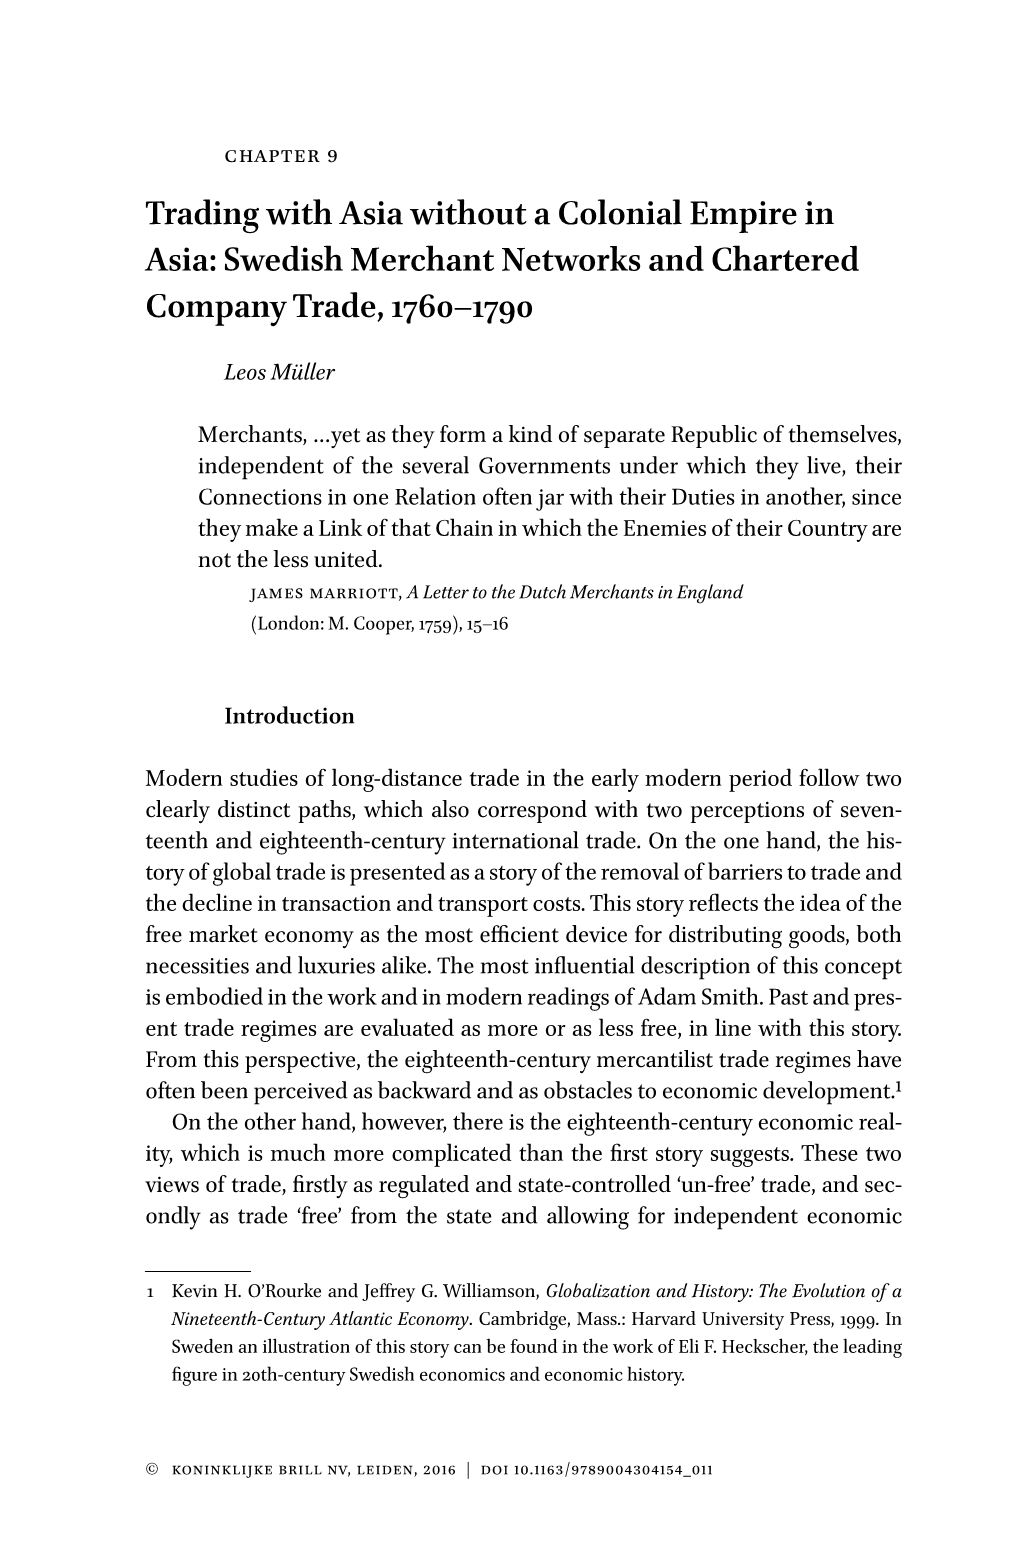 Trading with Asia Without a Colonial Empire in Asia: Swedish Merchant Networks and Chartered Company Trade, 1760–1790